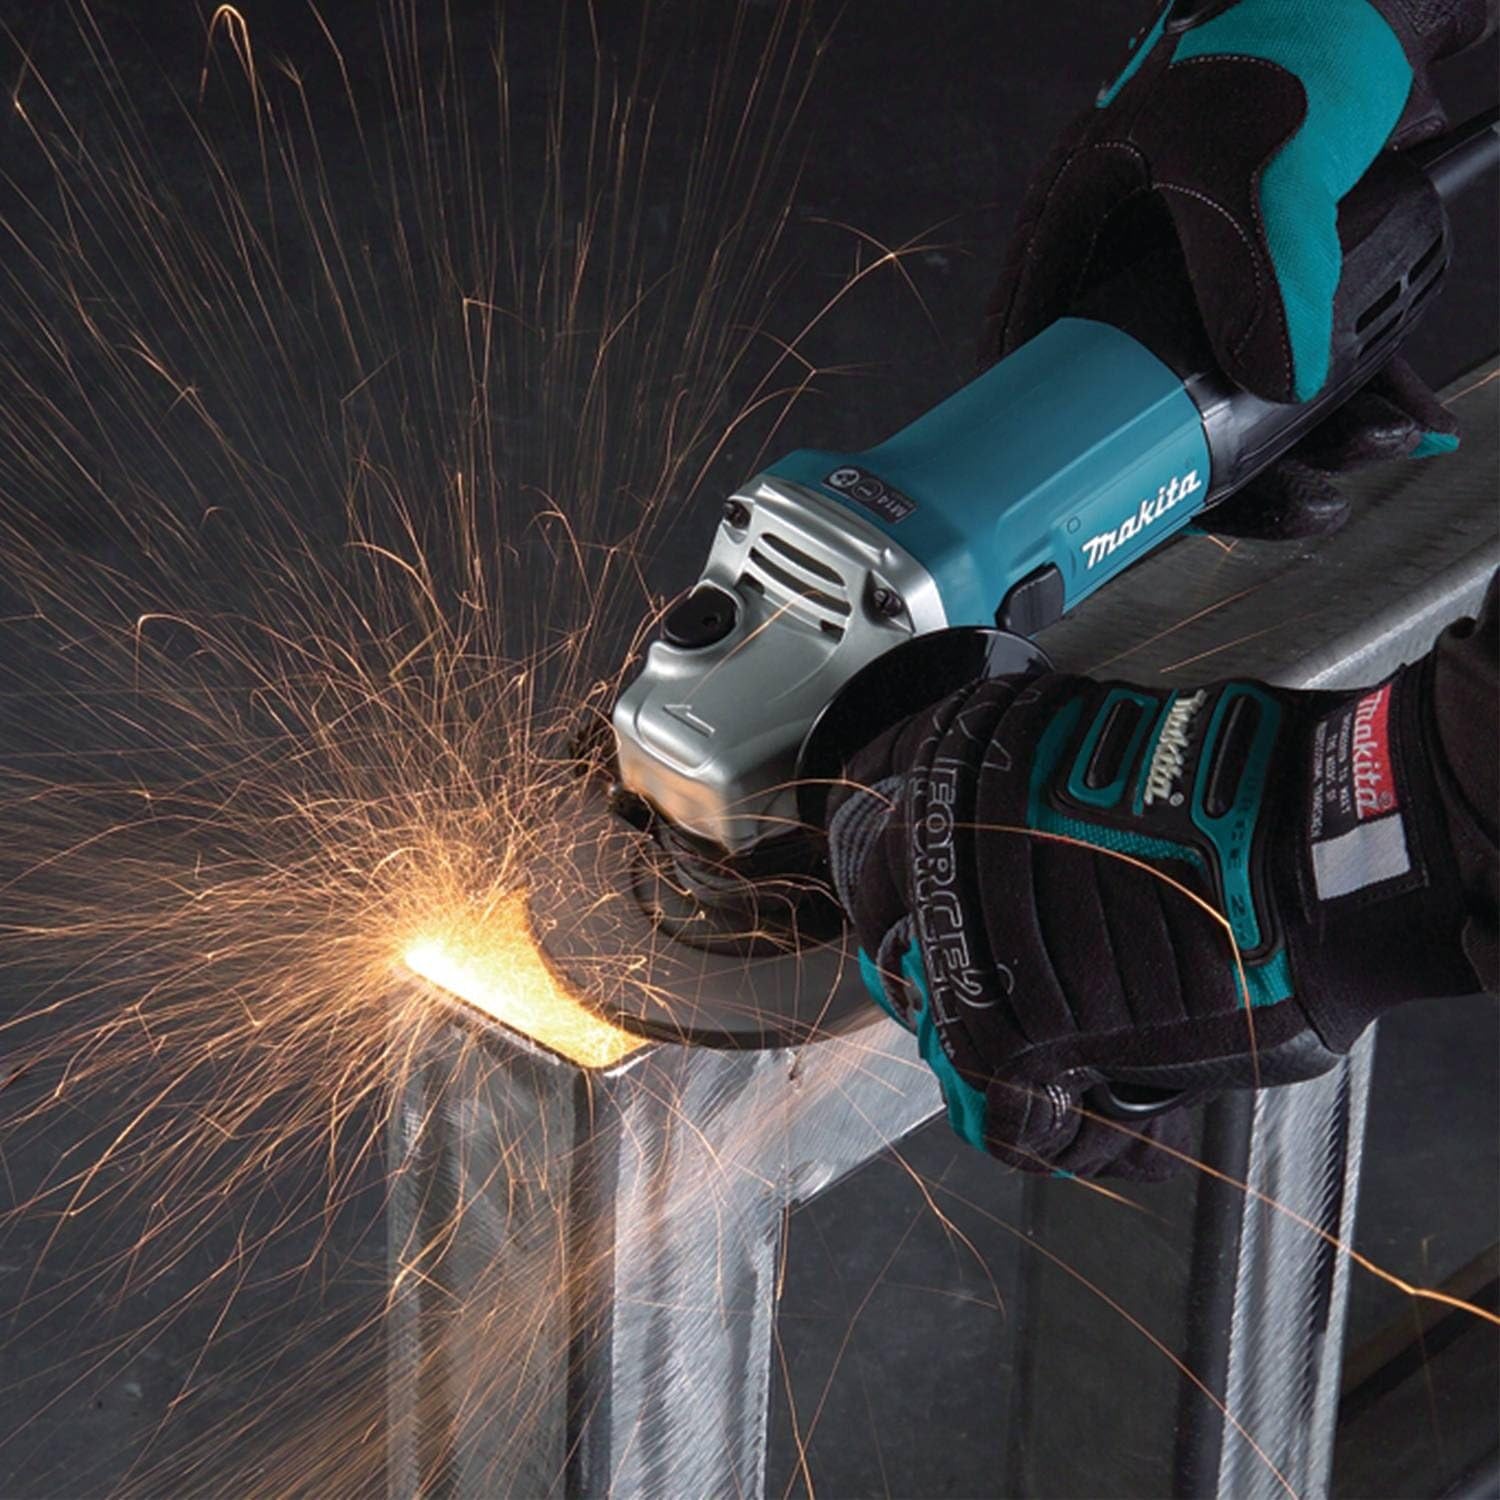 Makita HR2641X1 SDS-PLUS 3-Mode Variable Speed AVT Rotary Hammer with Case and 4-1/2 Angle Grinder, 1